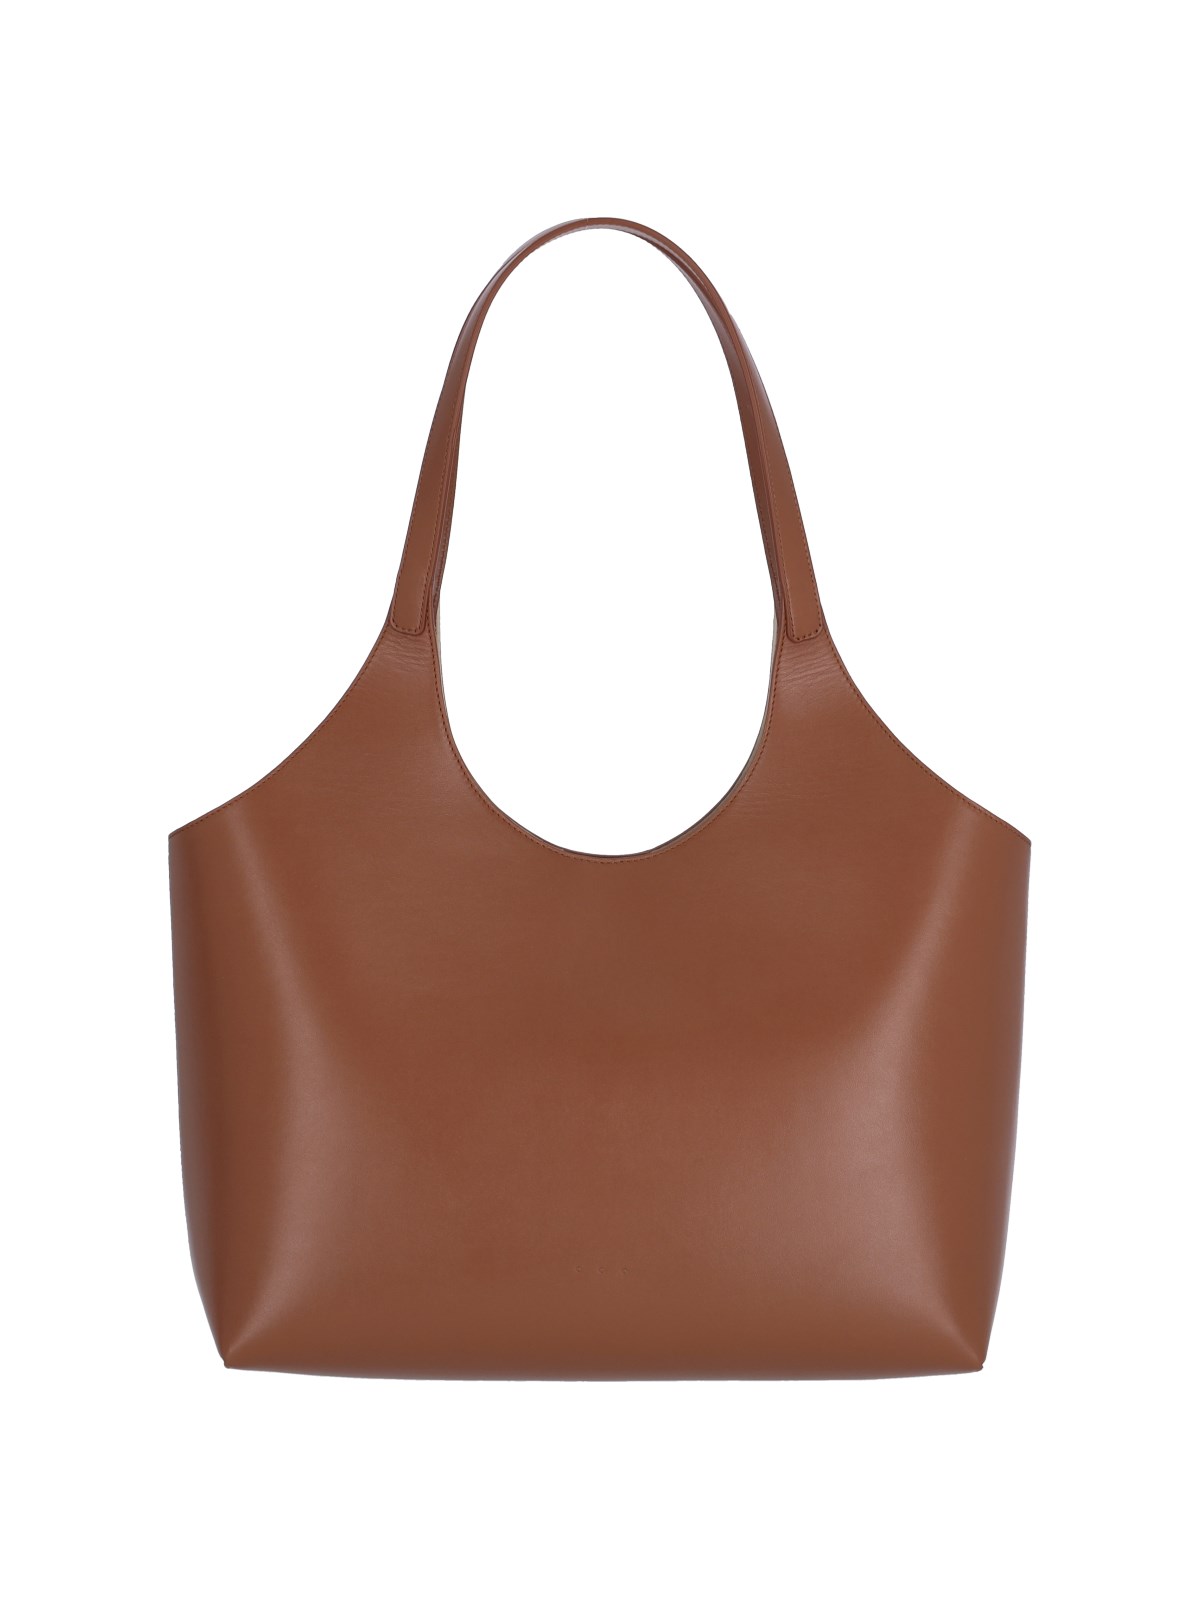 Aesther Ekme 'cabas' Tote Bag In Brown